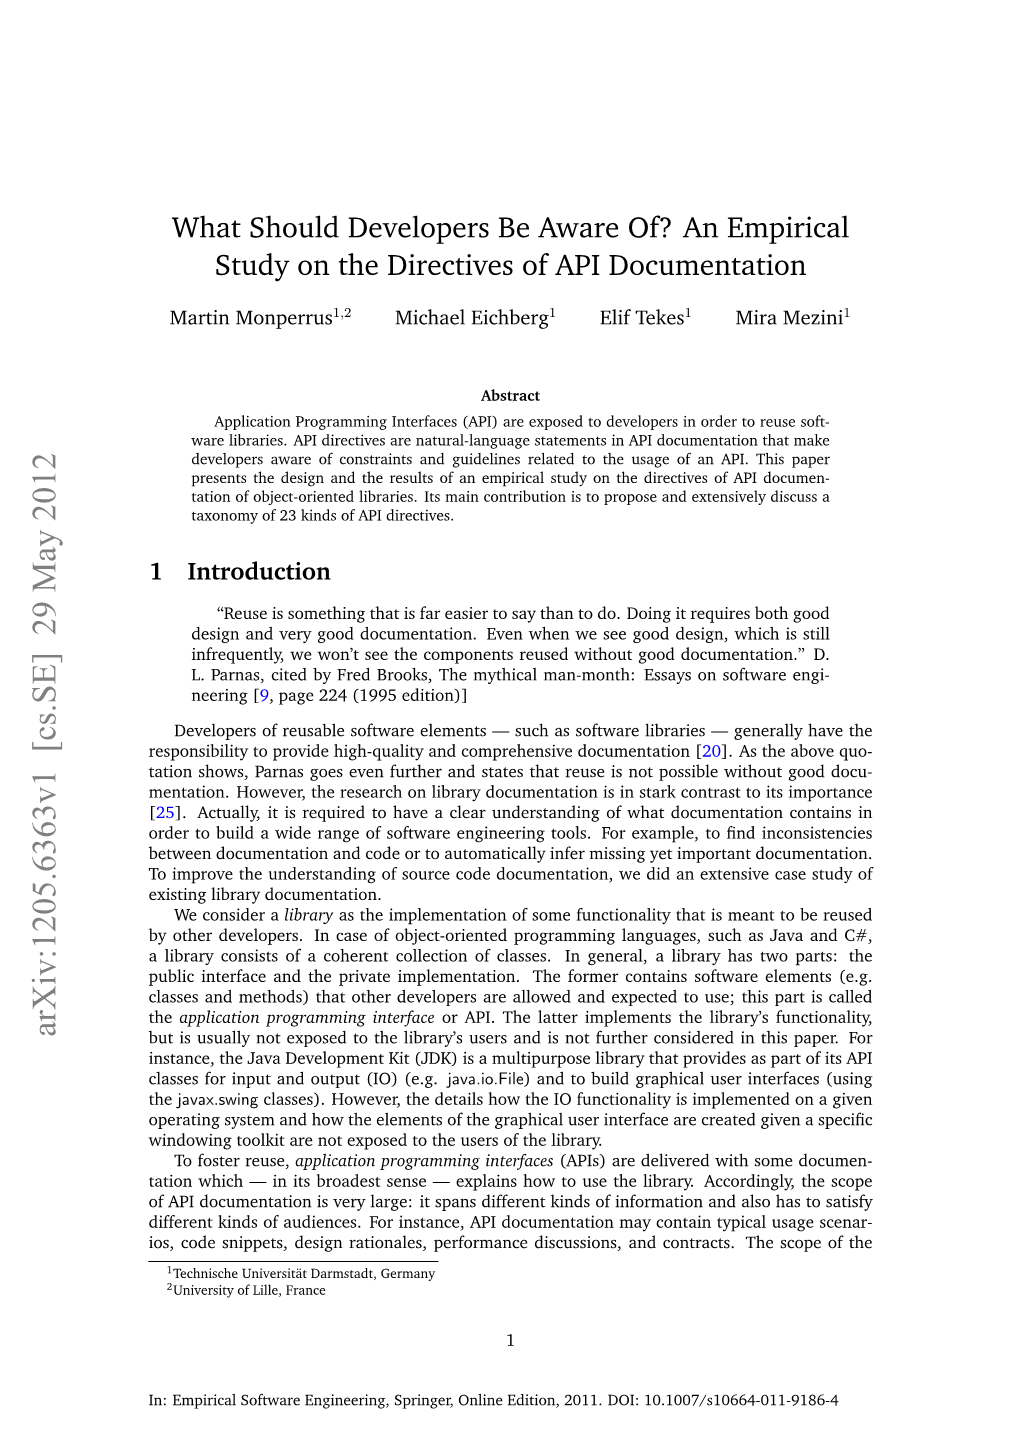 What Should Developers Be Aware Of? an Empirical Study on the Directives of API Documentation